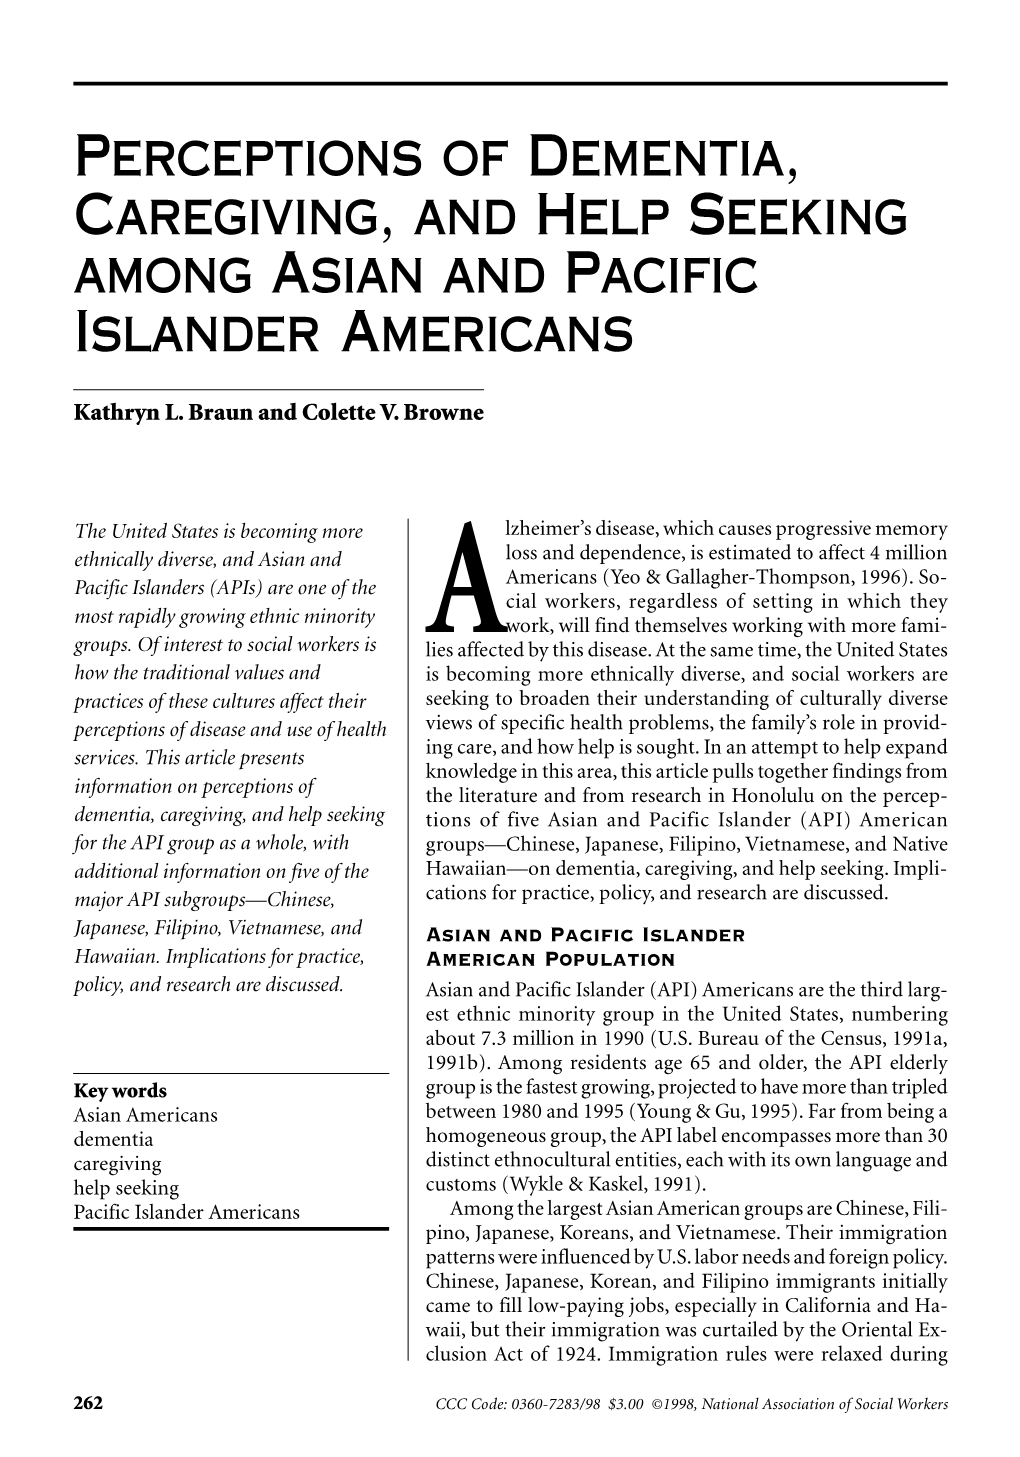 Perceptions of Dementia, Caregiving, and Help Seeking Among Asian and Pacific Islander Americans